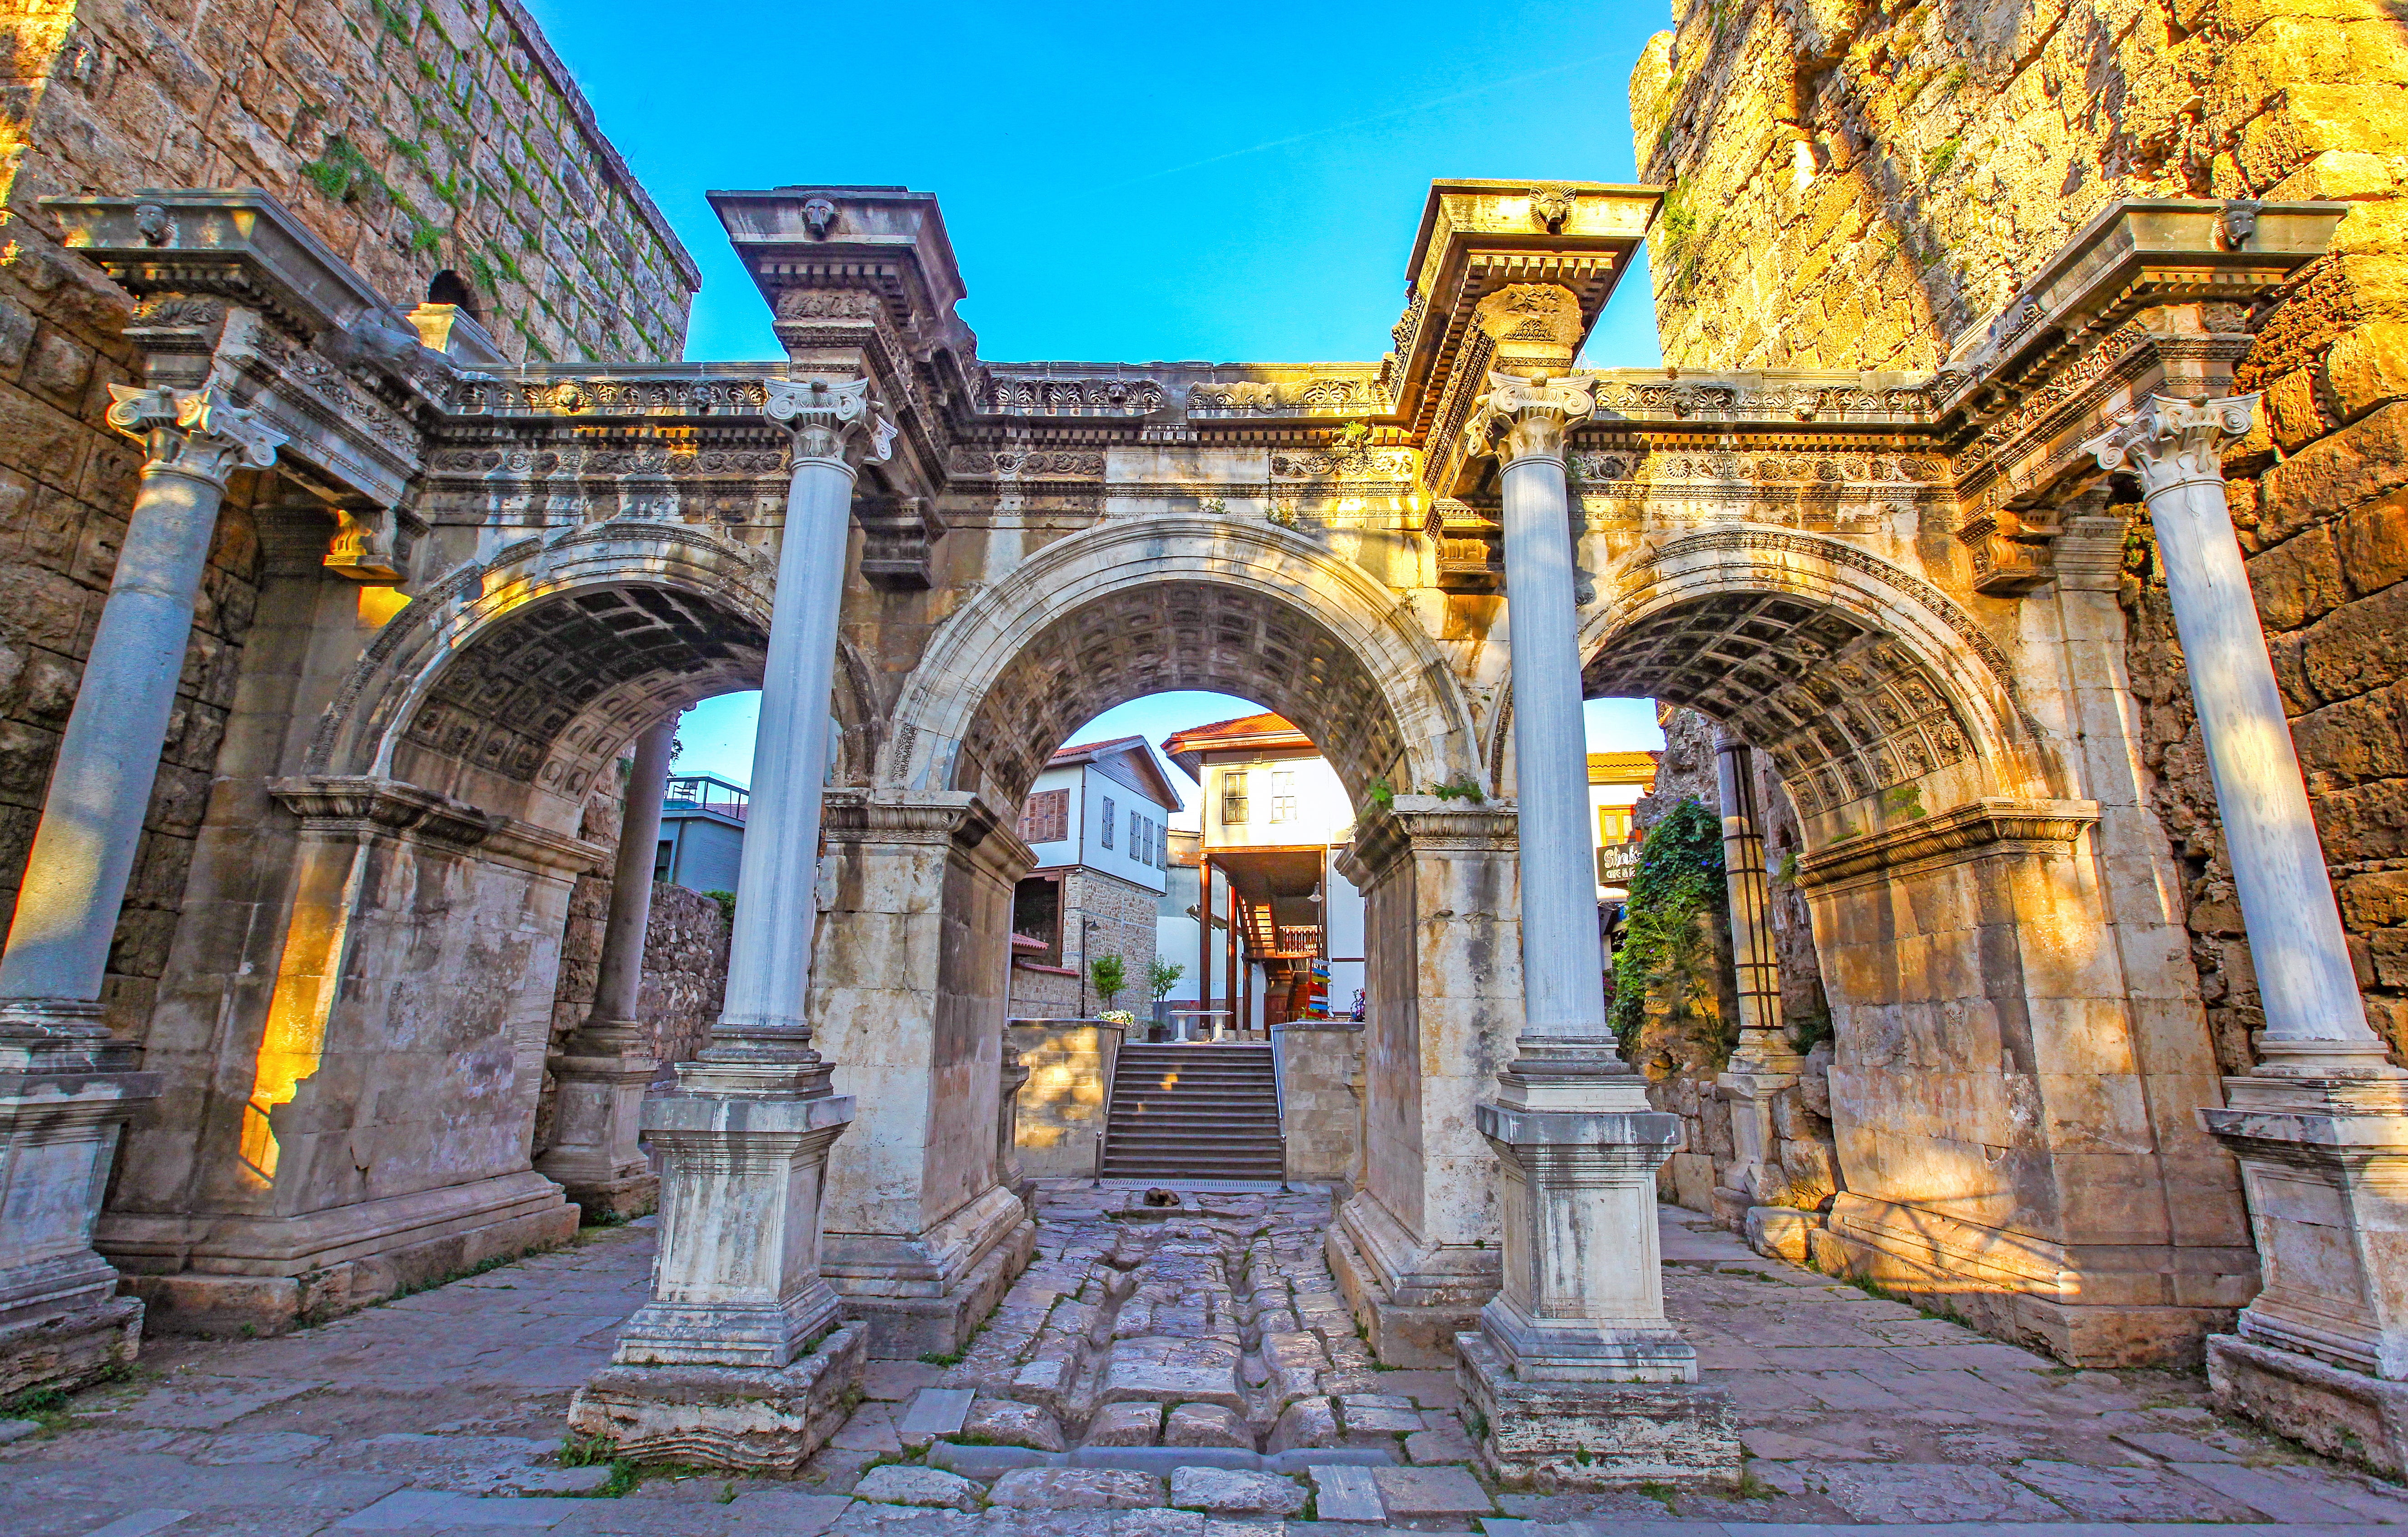 The historic Hadrian’s Gate in Kaleiçi is a must-visit